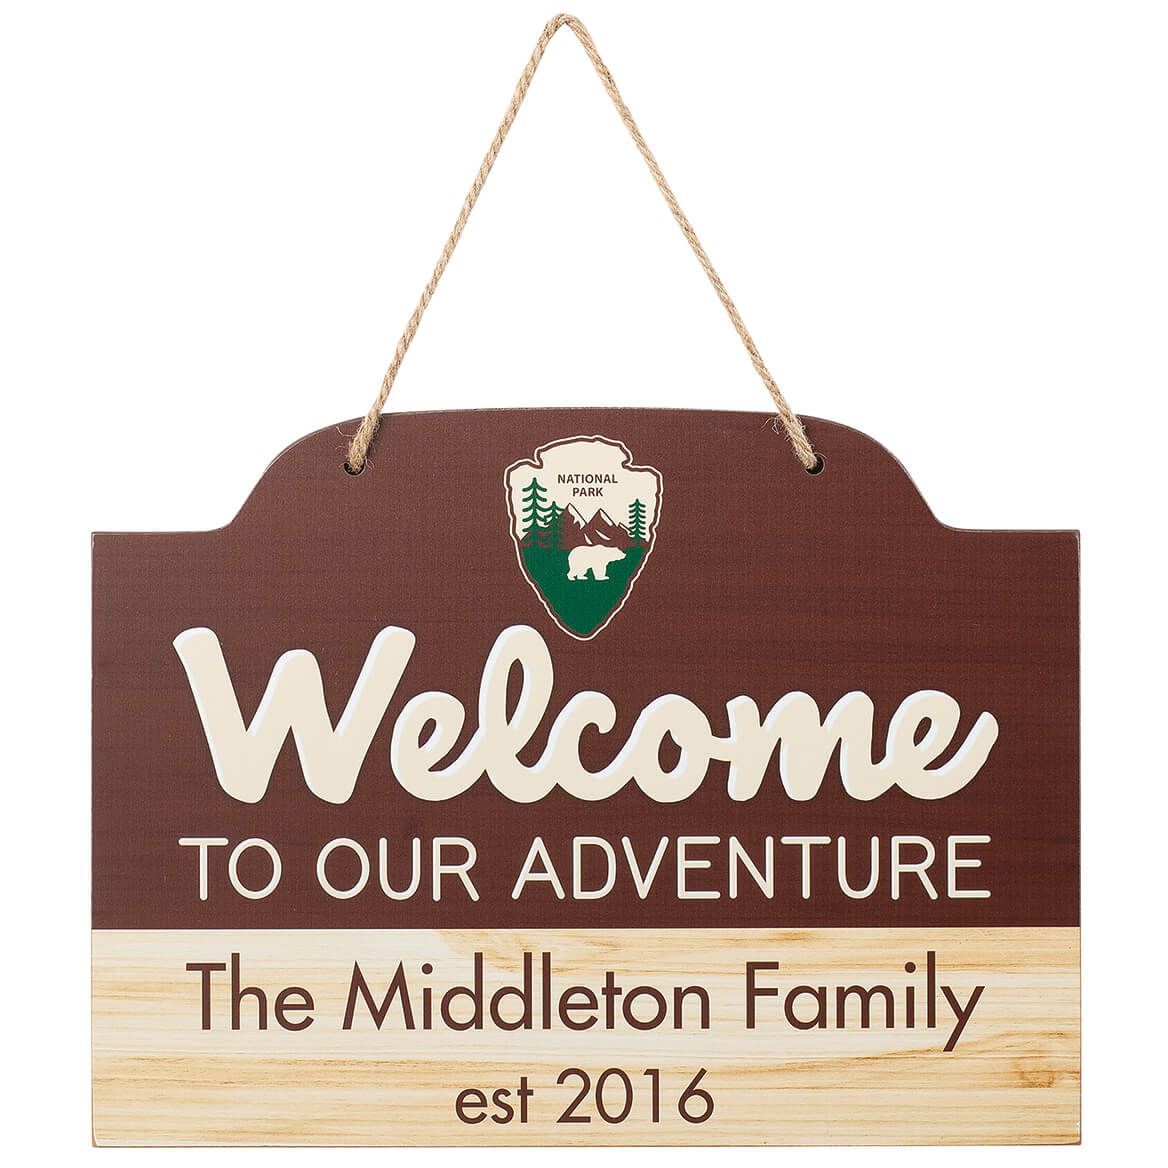 Personalized Our Adventure Hanging Sign + '-' + 376886